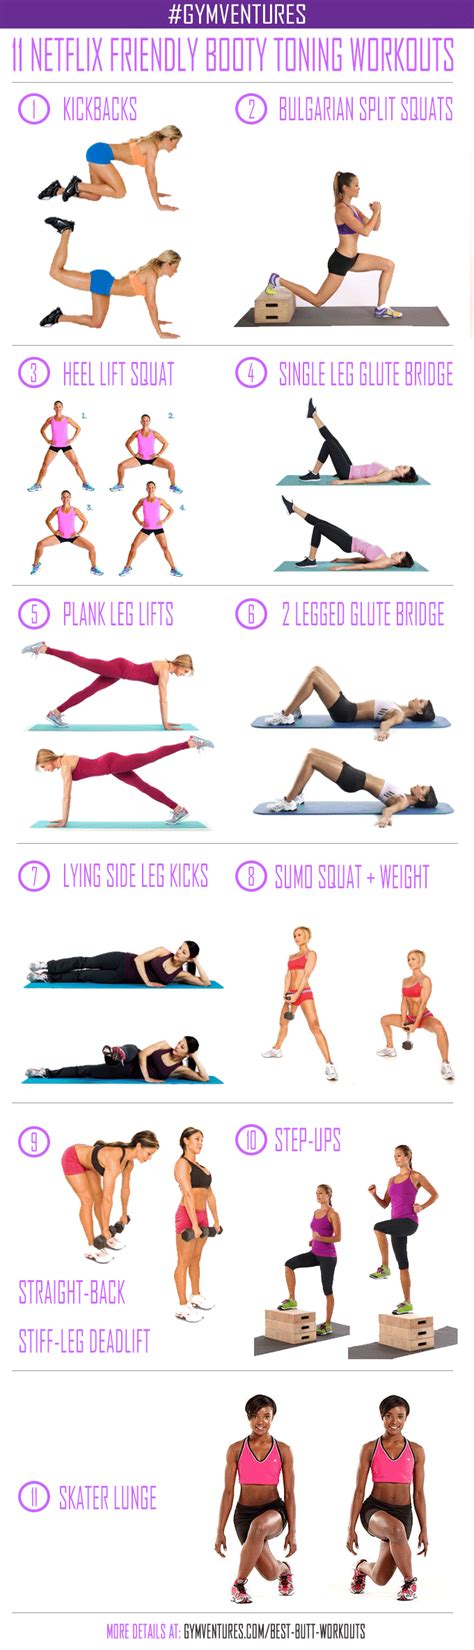 Best Butt Workouts You Can Do At Home [ Infographic]